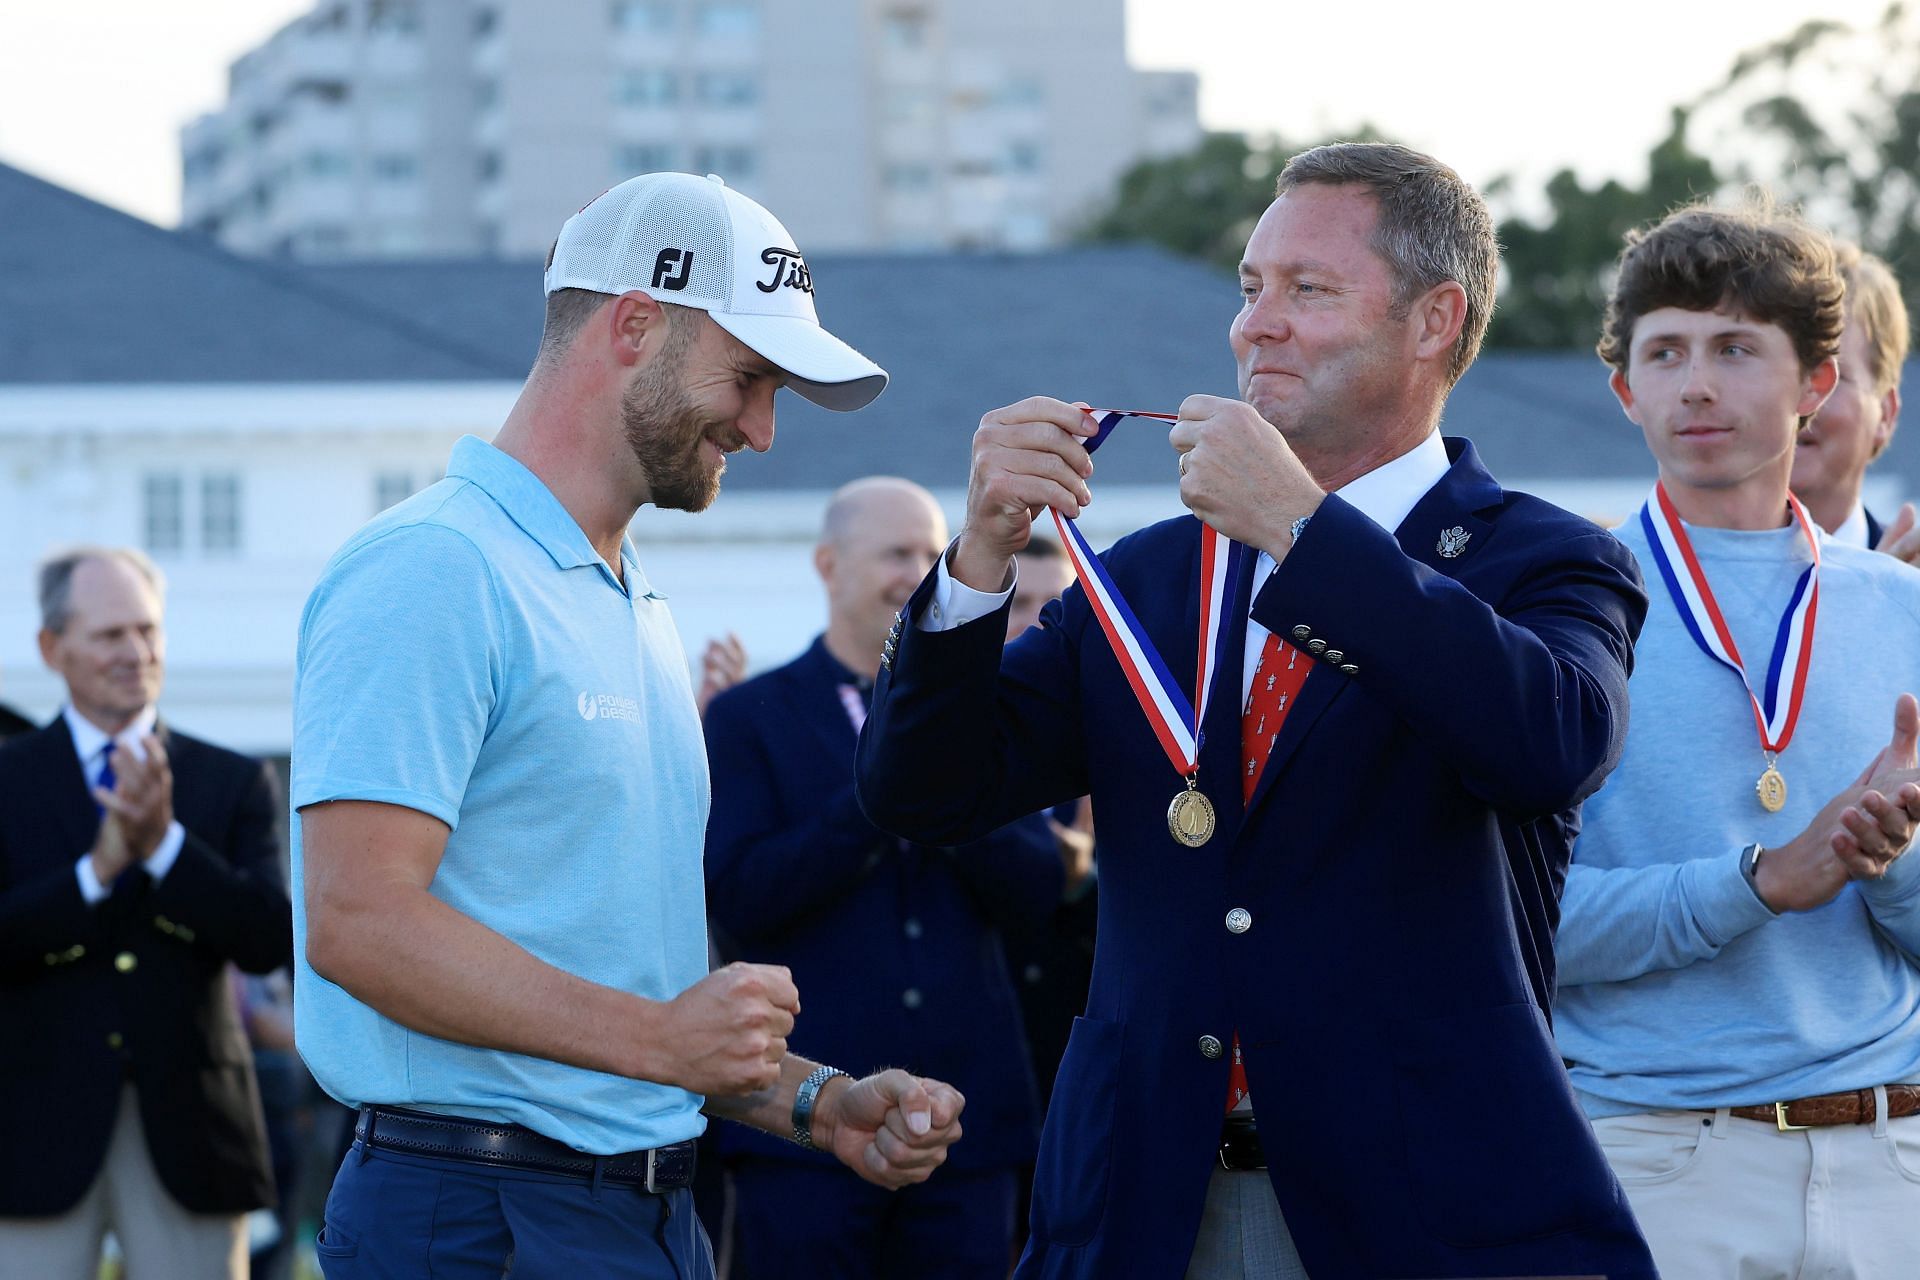 Clark receives the Nicklaus medal at the 123rd U.S. Open Championship